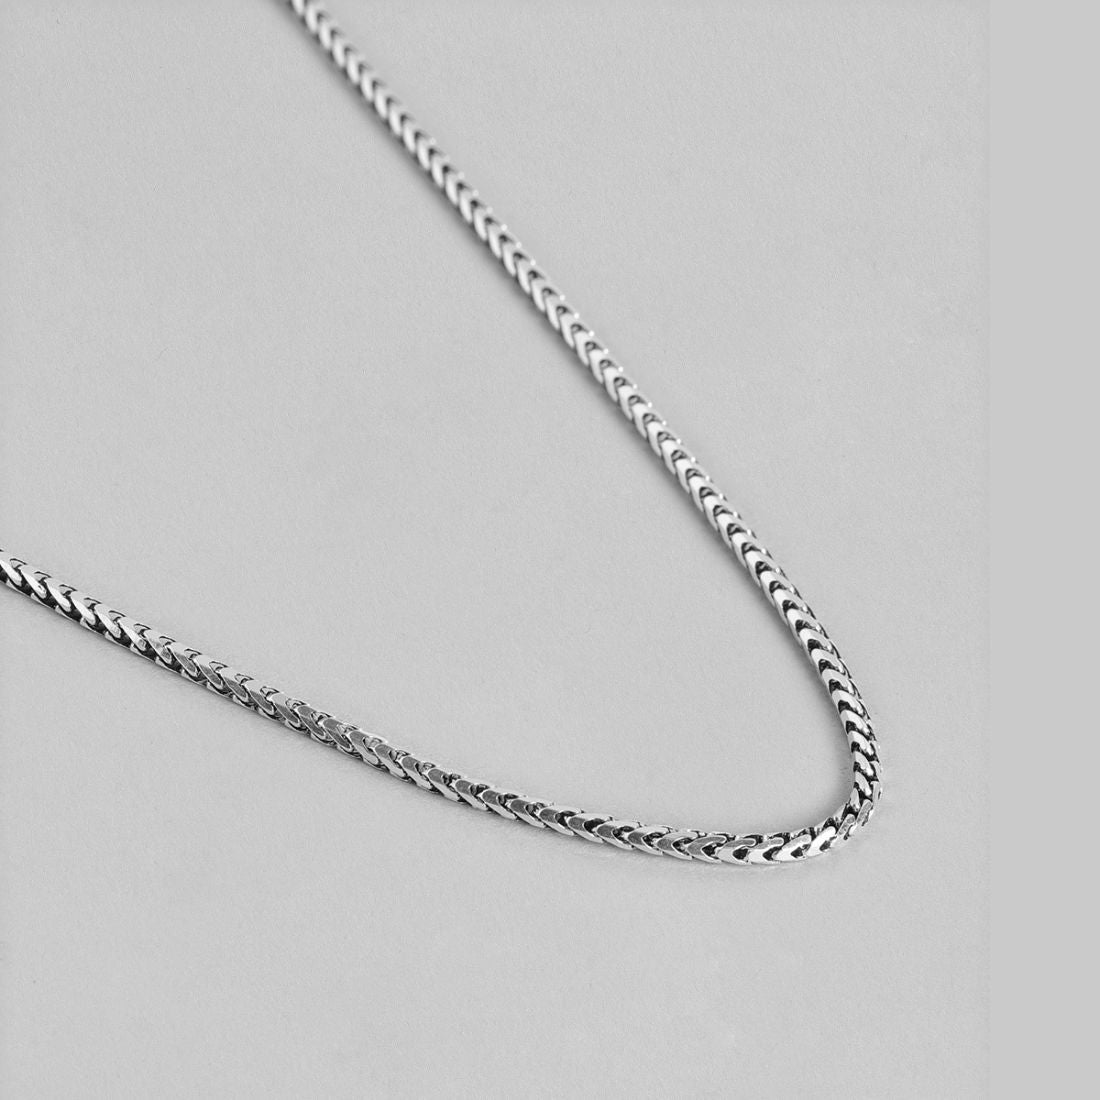 Lustrous Weave Rhodium-Plated 925 Sterling Silver Chain for Men